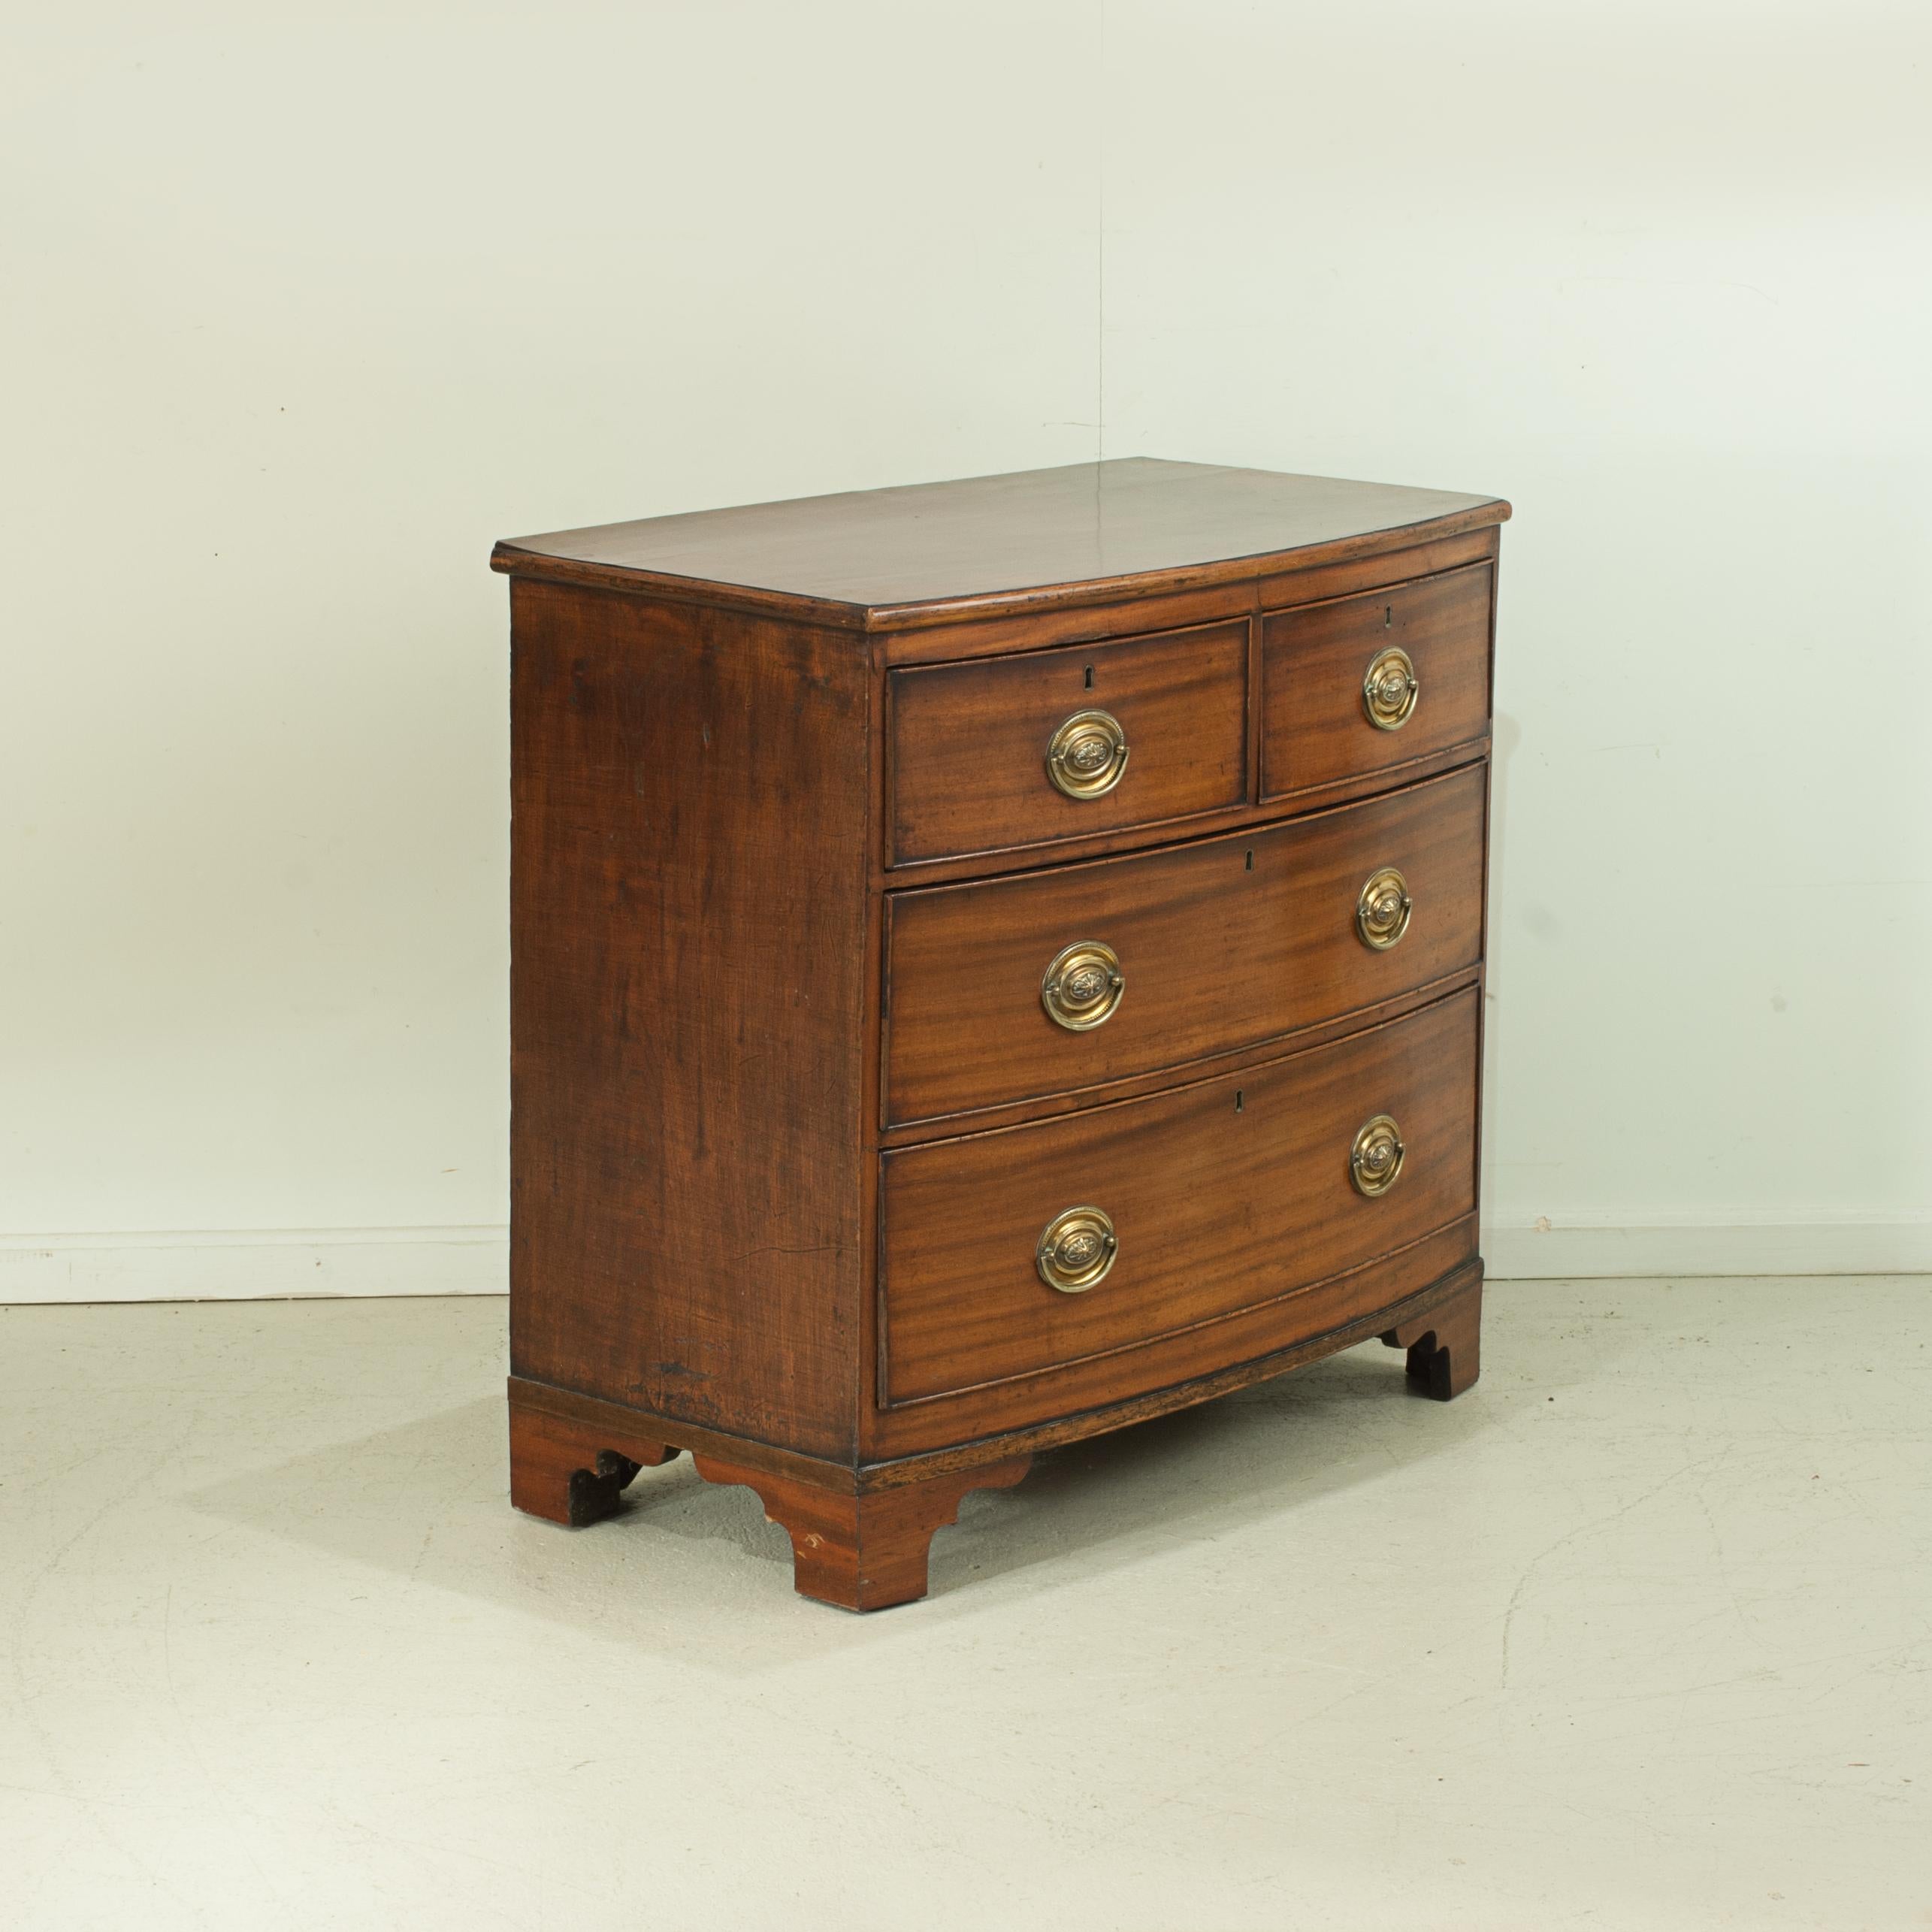 Small bow-front chest of drawers.
A rather charming, small, Regency mahogany bow fronted chest of drawers. Two short drawers over two more long graduated drawers, all fitted with brass oval back plate handles. This useful chest is raised on later